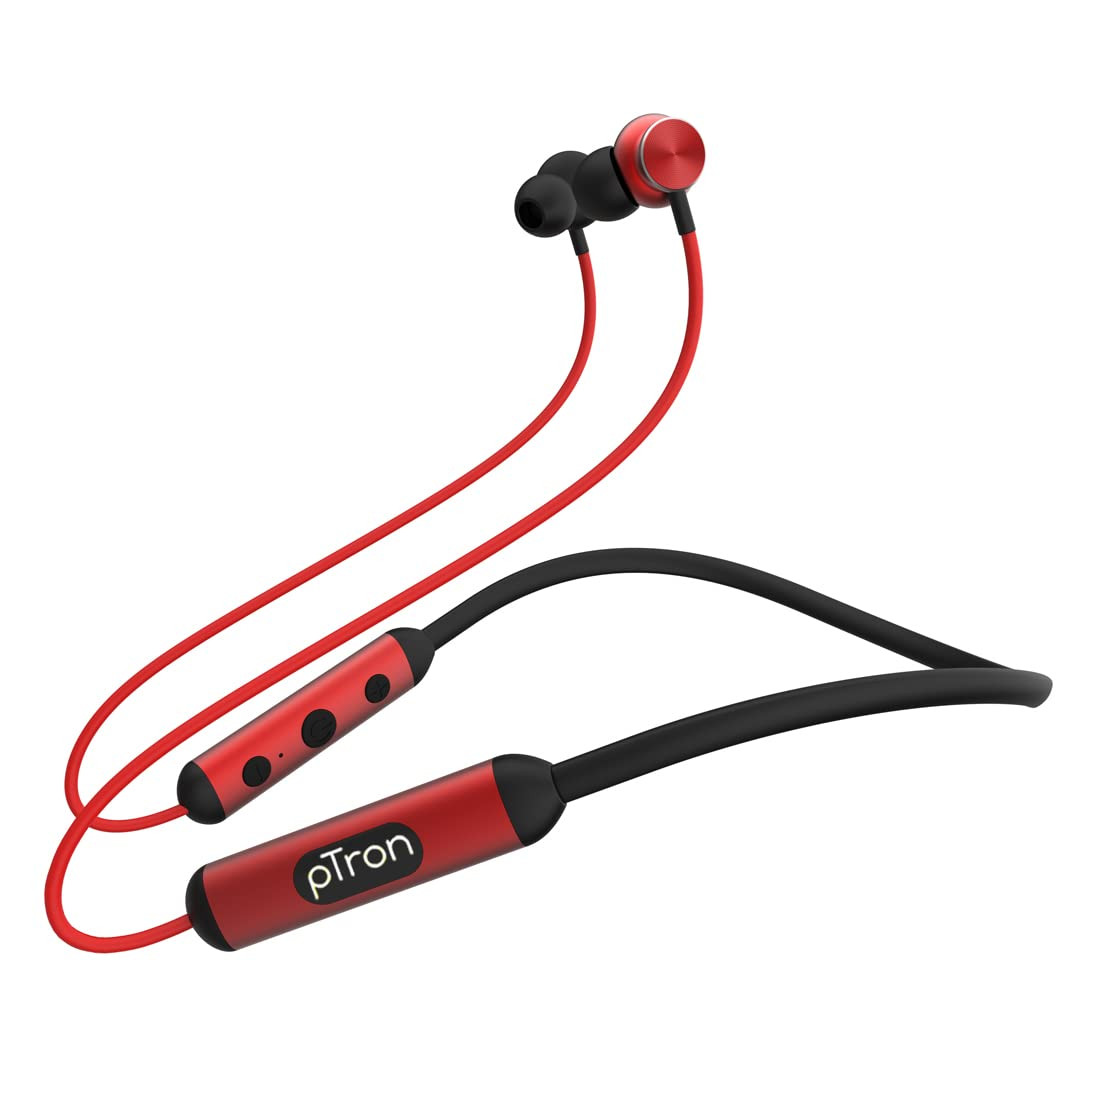 pTron InTunes Ultima In-Ear Wireless Earphones with Mic 18 Hrs Music with Mega Bass Bluetooth 50 Neckband Lightweight Voice Assistant Type-C Fast Charging IPX4 Water Resistant Jet Black  Red